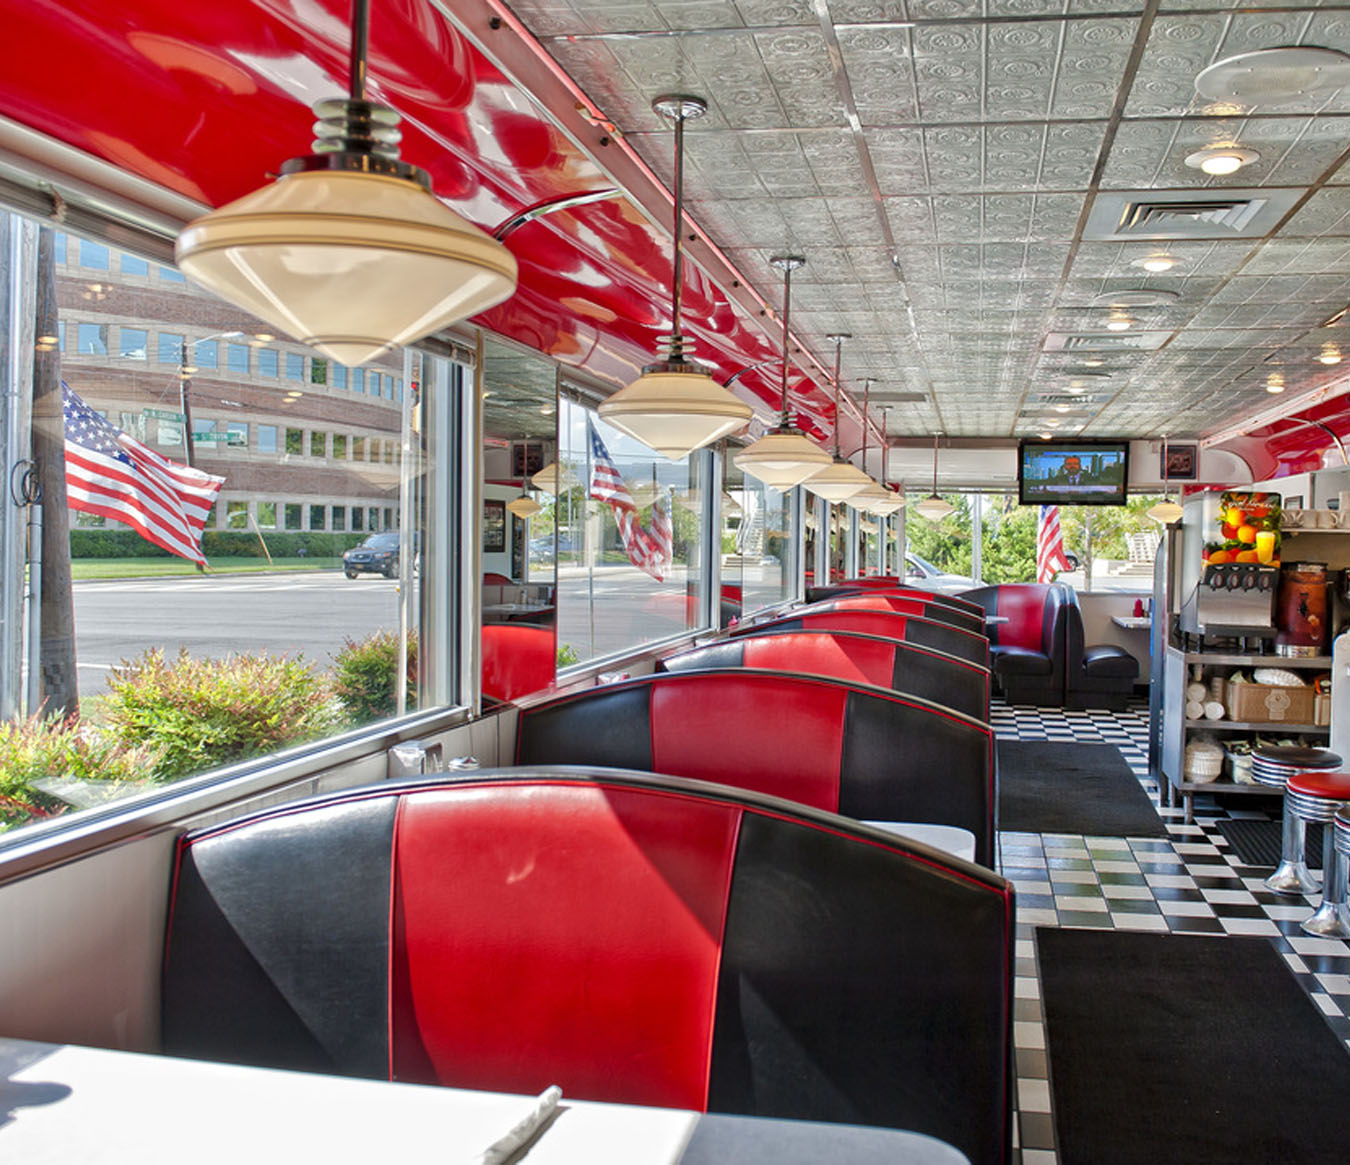 Where to Eat In Charlotte - Midnight Diner